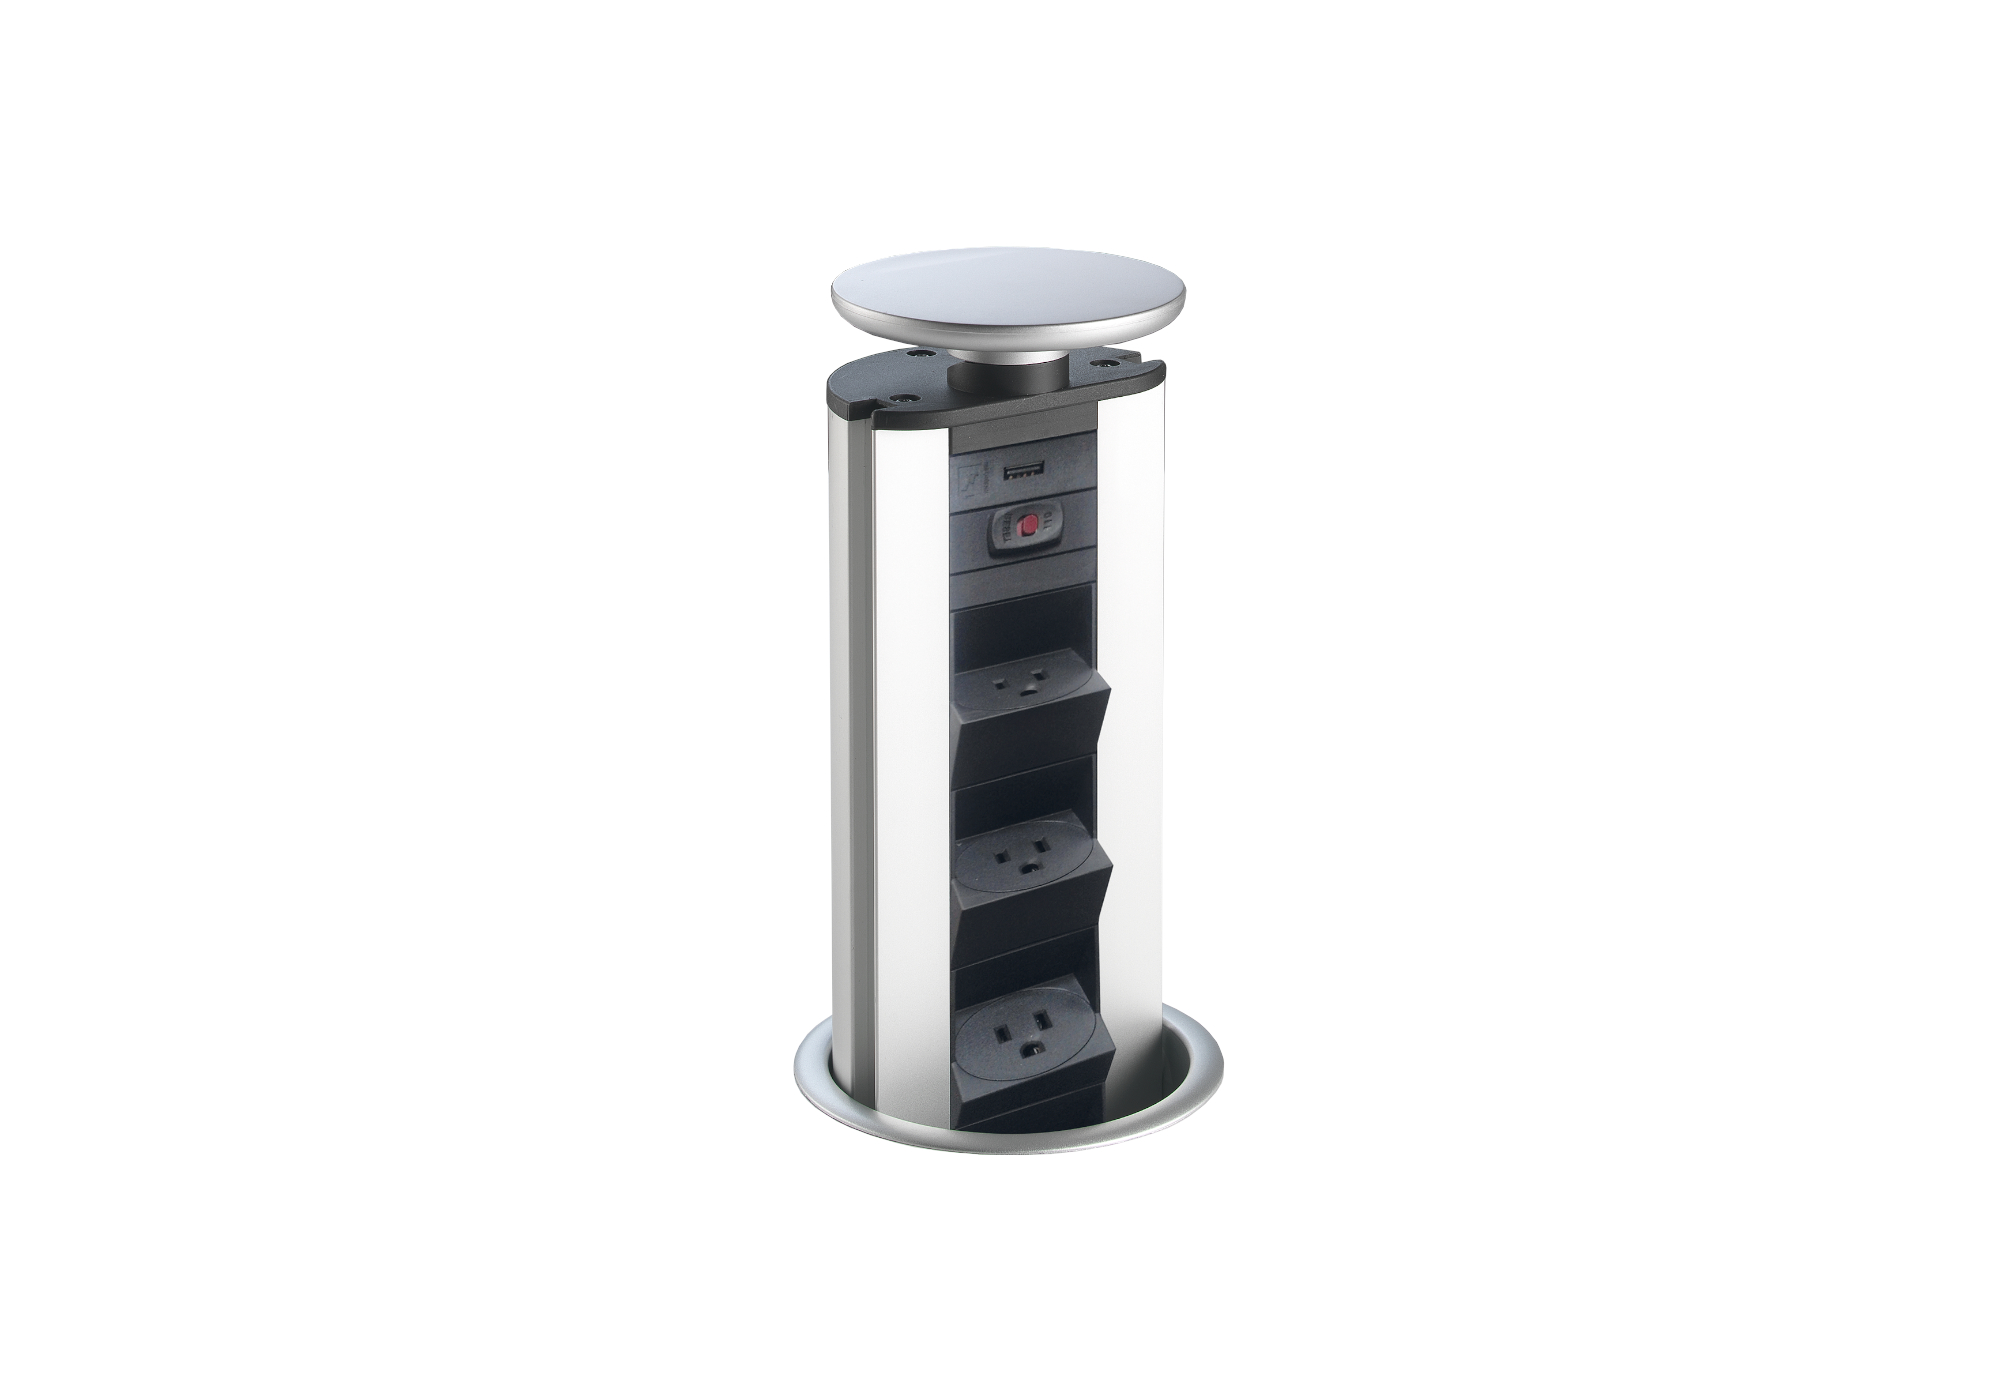 Totem - Extractable socket-holder tower